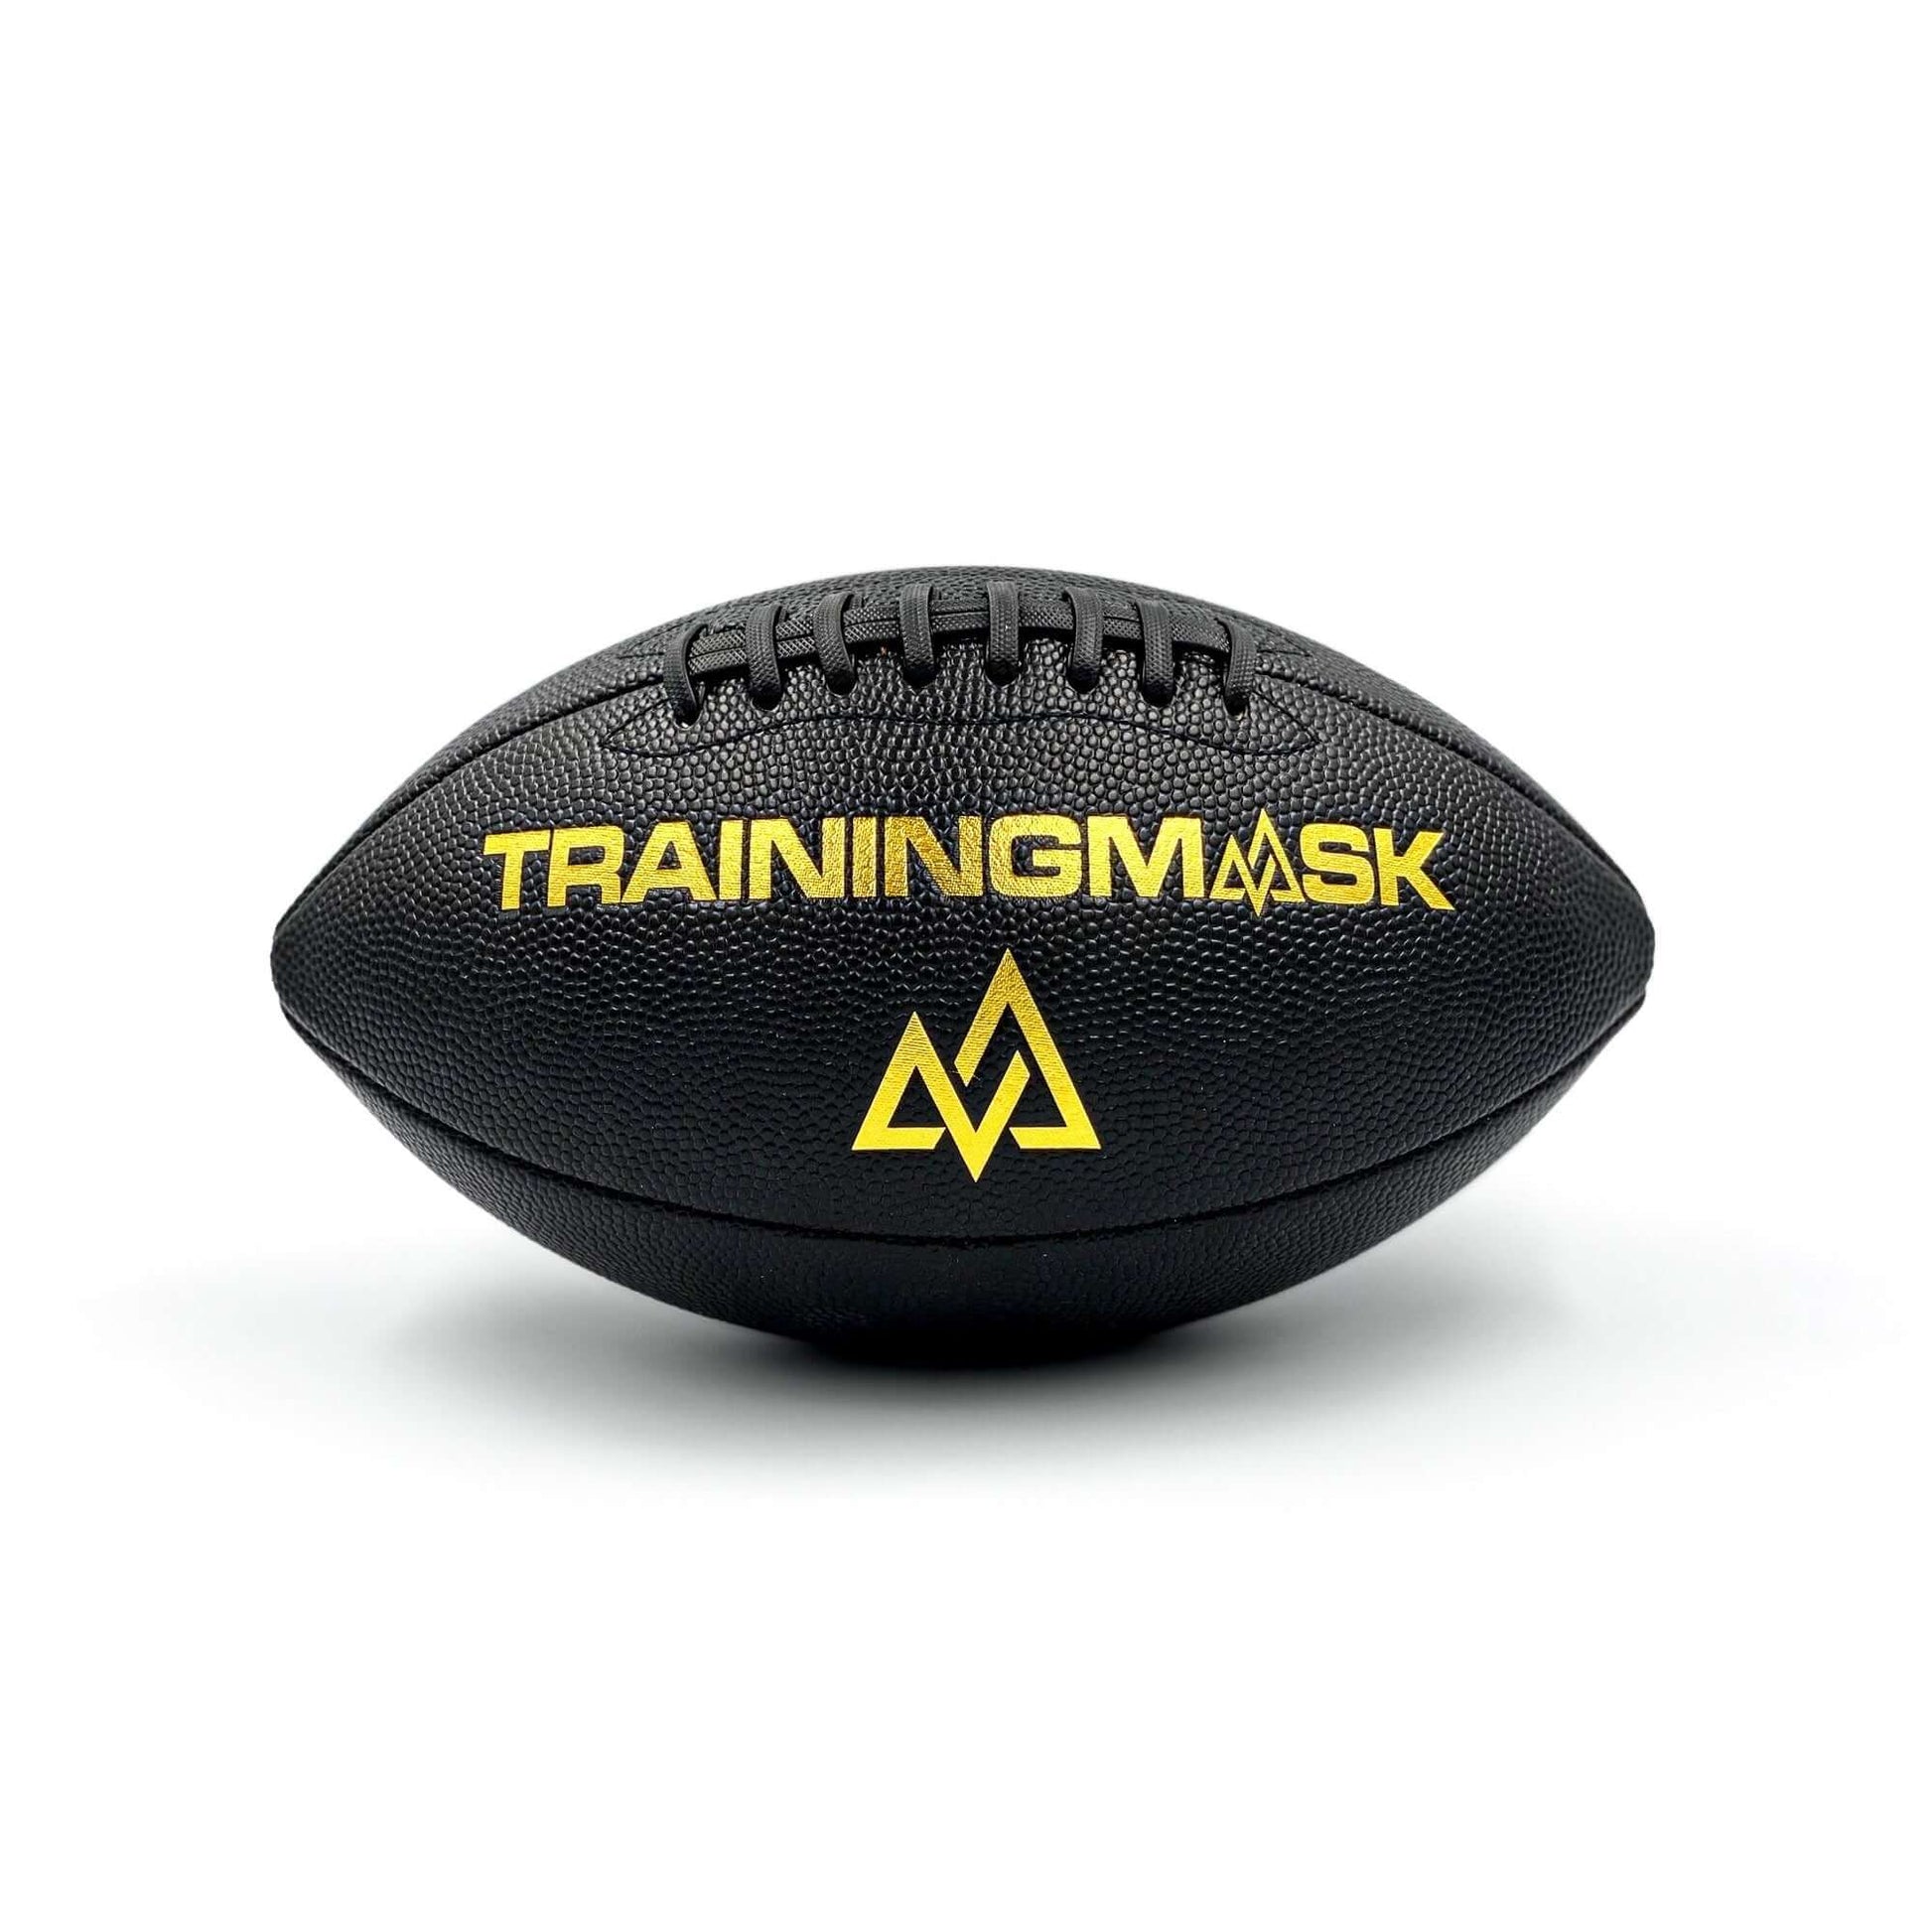 TRAINING MASK 3.0 - High-Quality and Affordable Product for Your Needs –